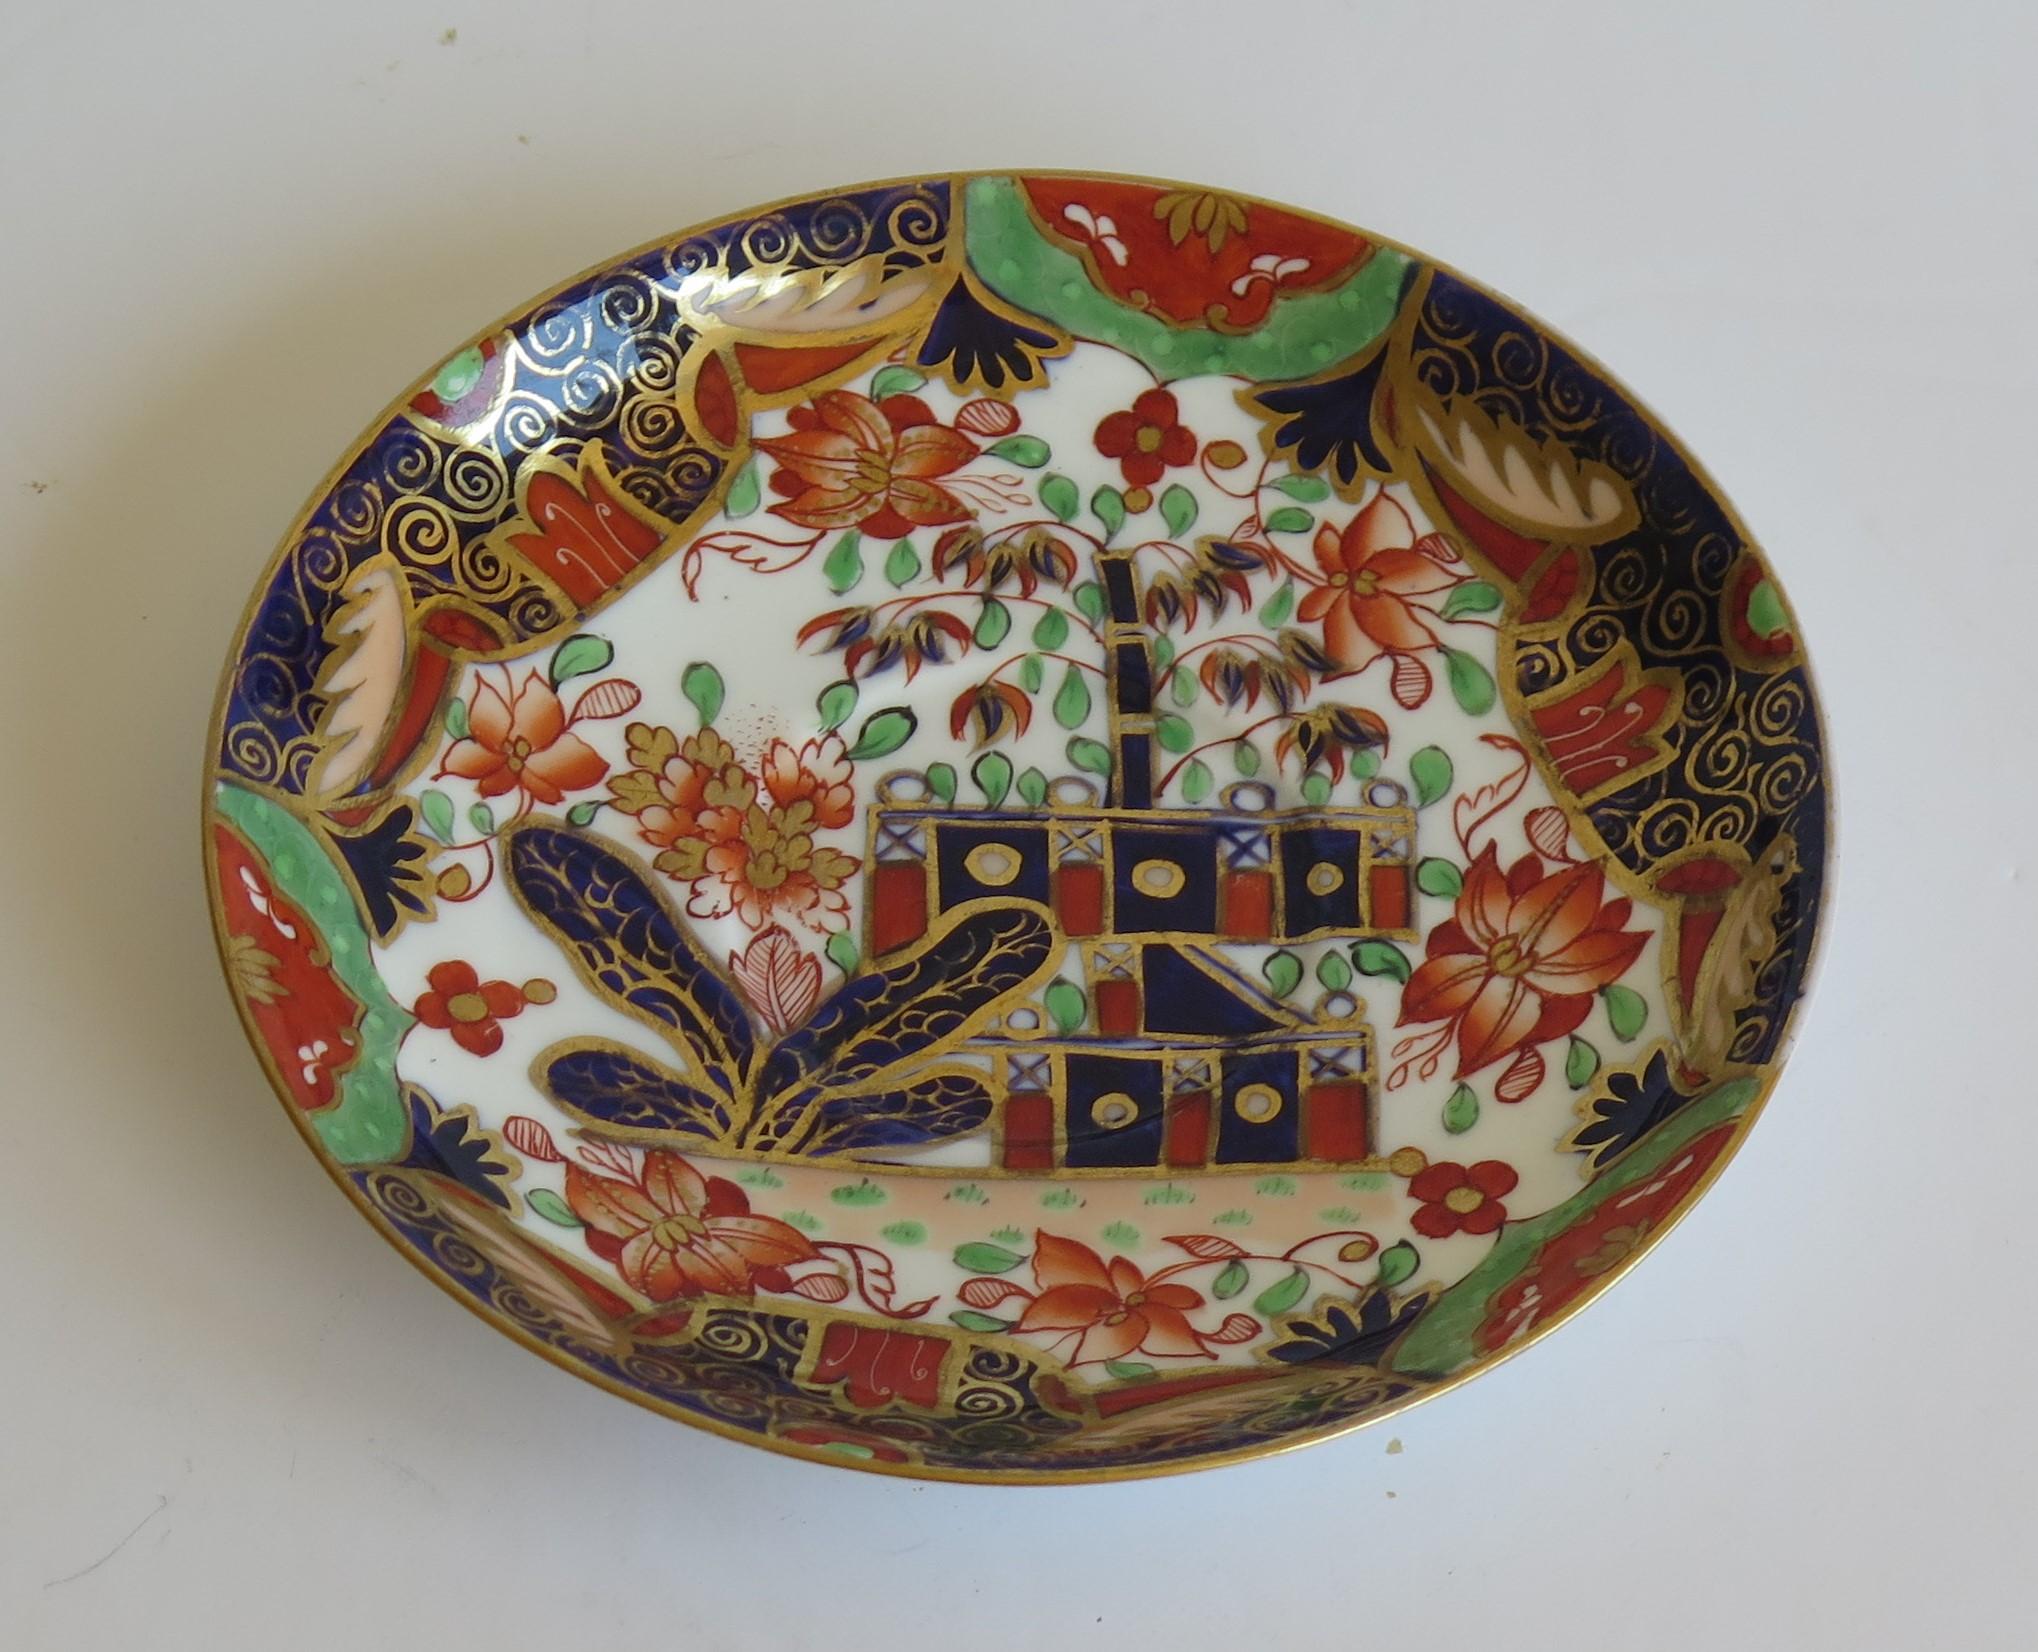 This is a beautiful small saucer-dish in the Japanese inspired Imari Fence pattern number 794, produced by the Copeland - Late Spode factory and made of porcelain in the mid 19th century, circa 1865.

The pattern is finely hand painted in bold